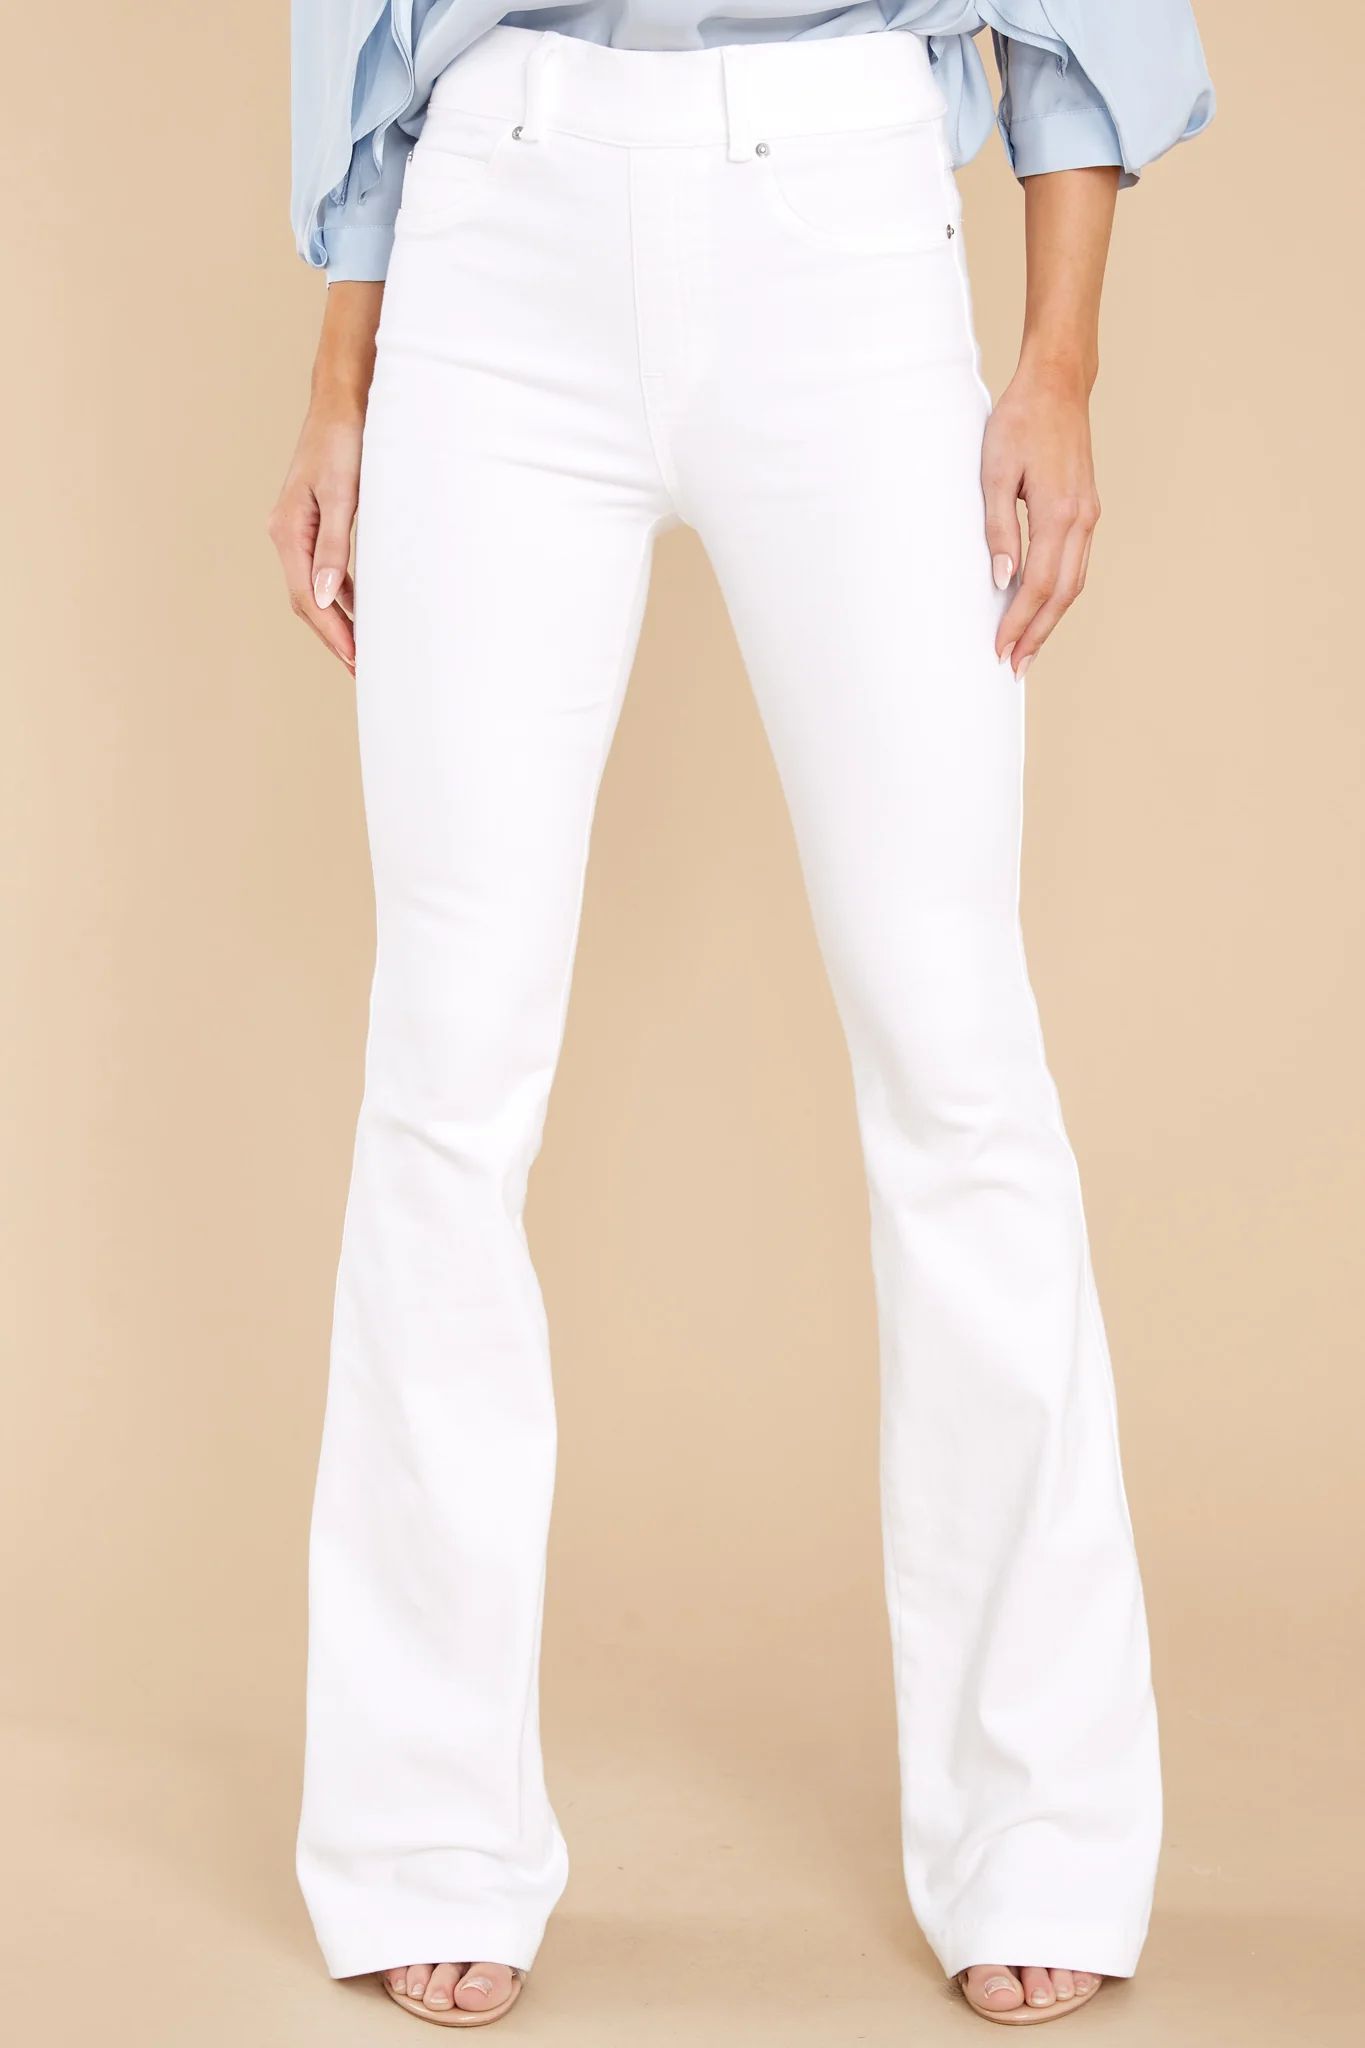 Spanx White Flare Jeans | Red Dress 